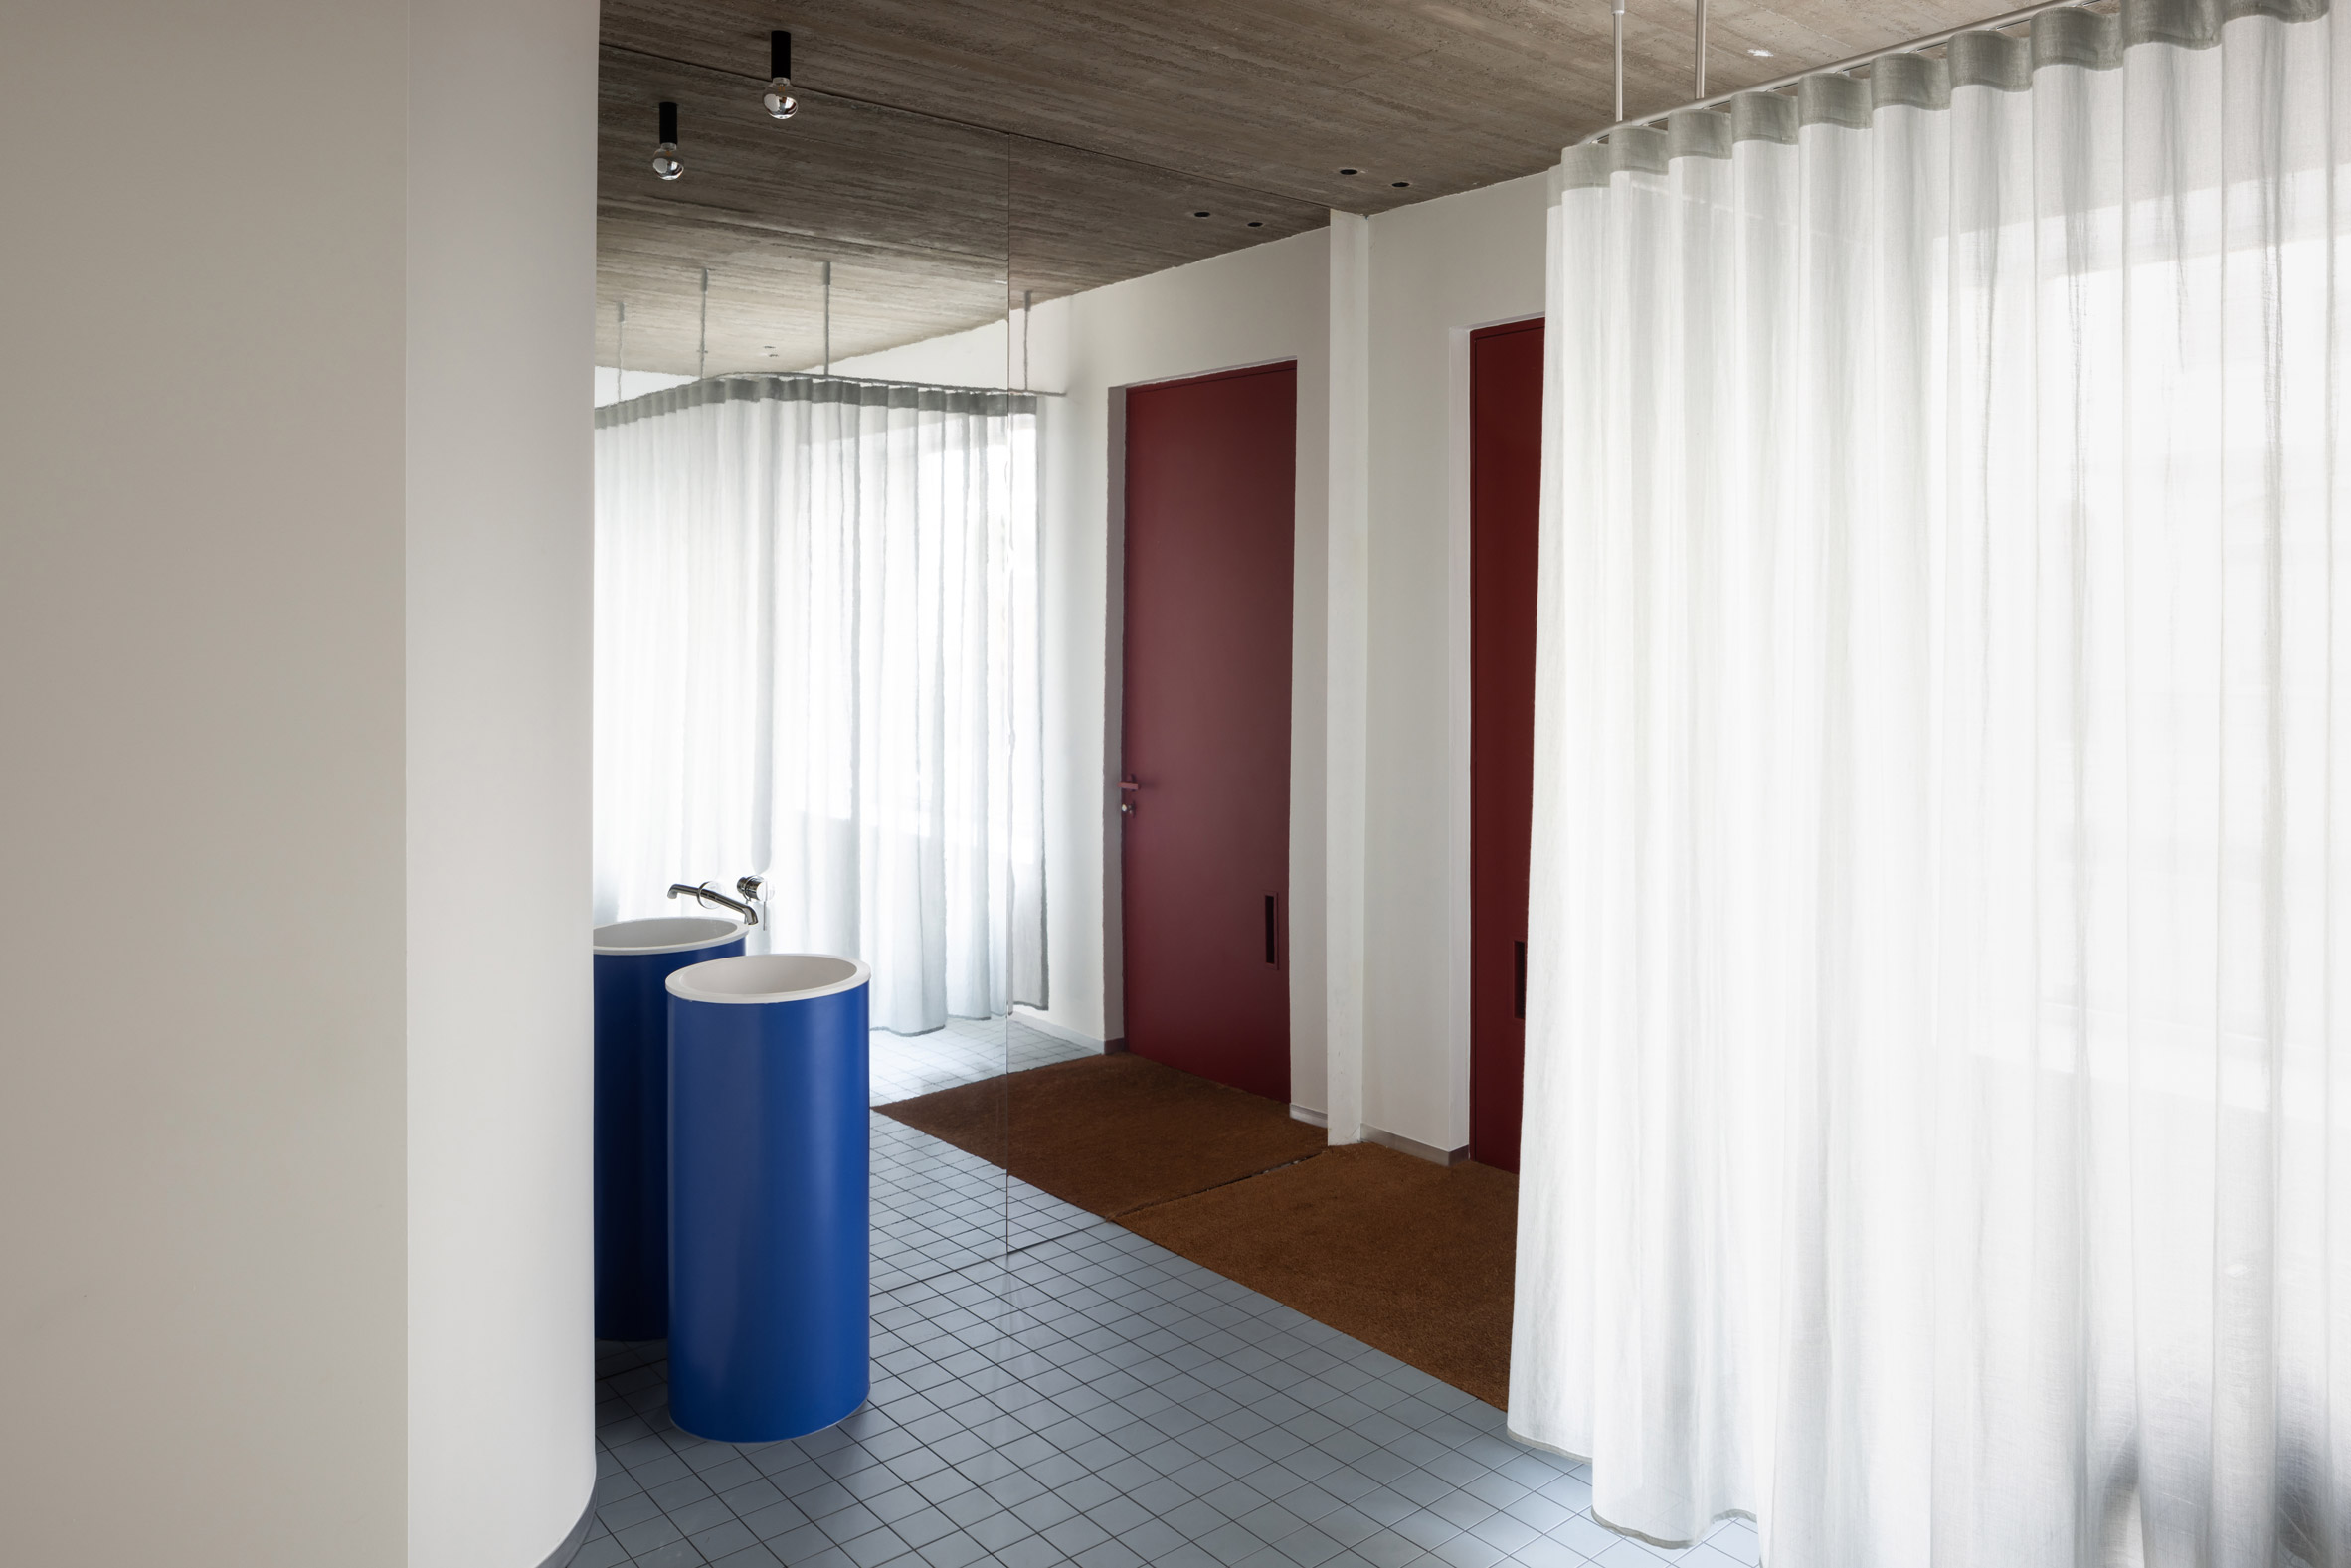 Home entryway of Well by Memo Architectuur in Mortsel, Belgium